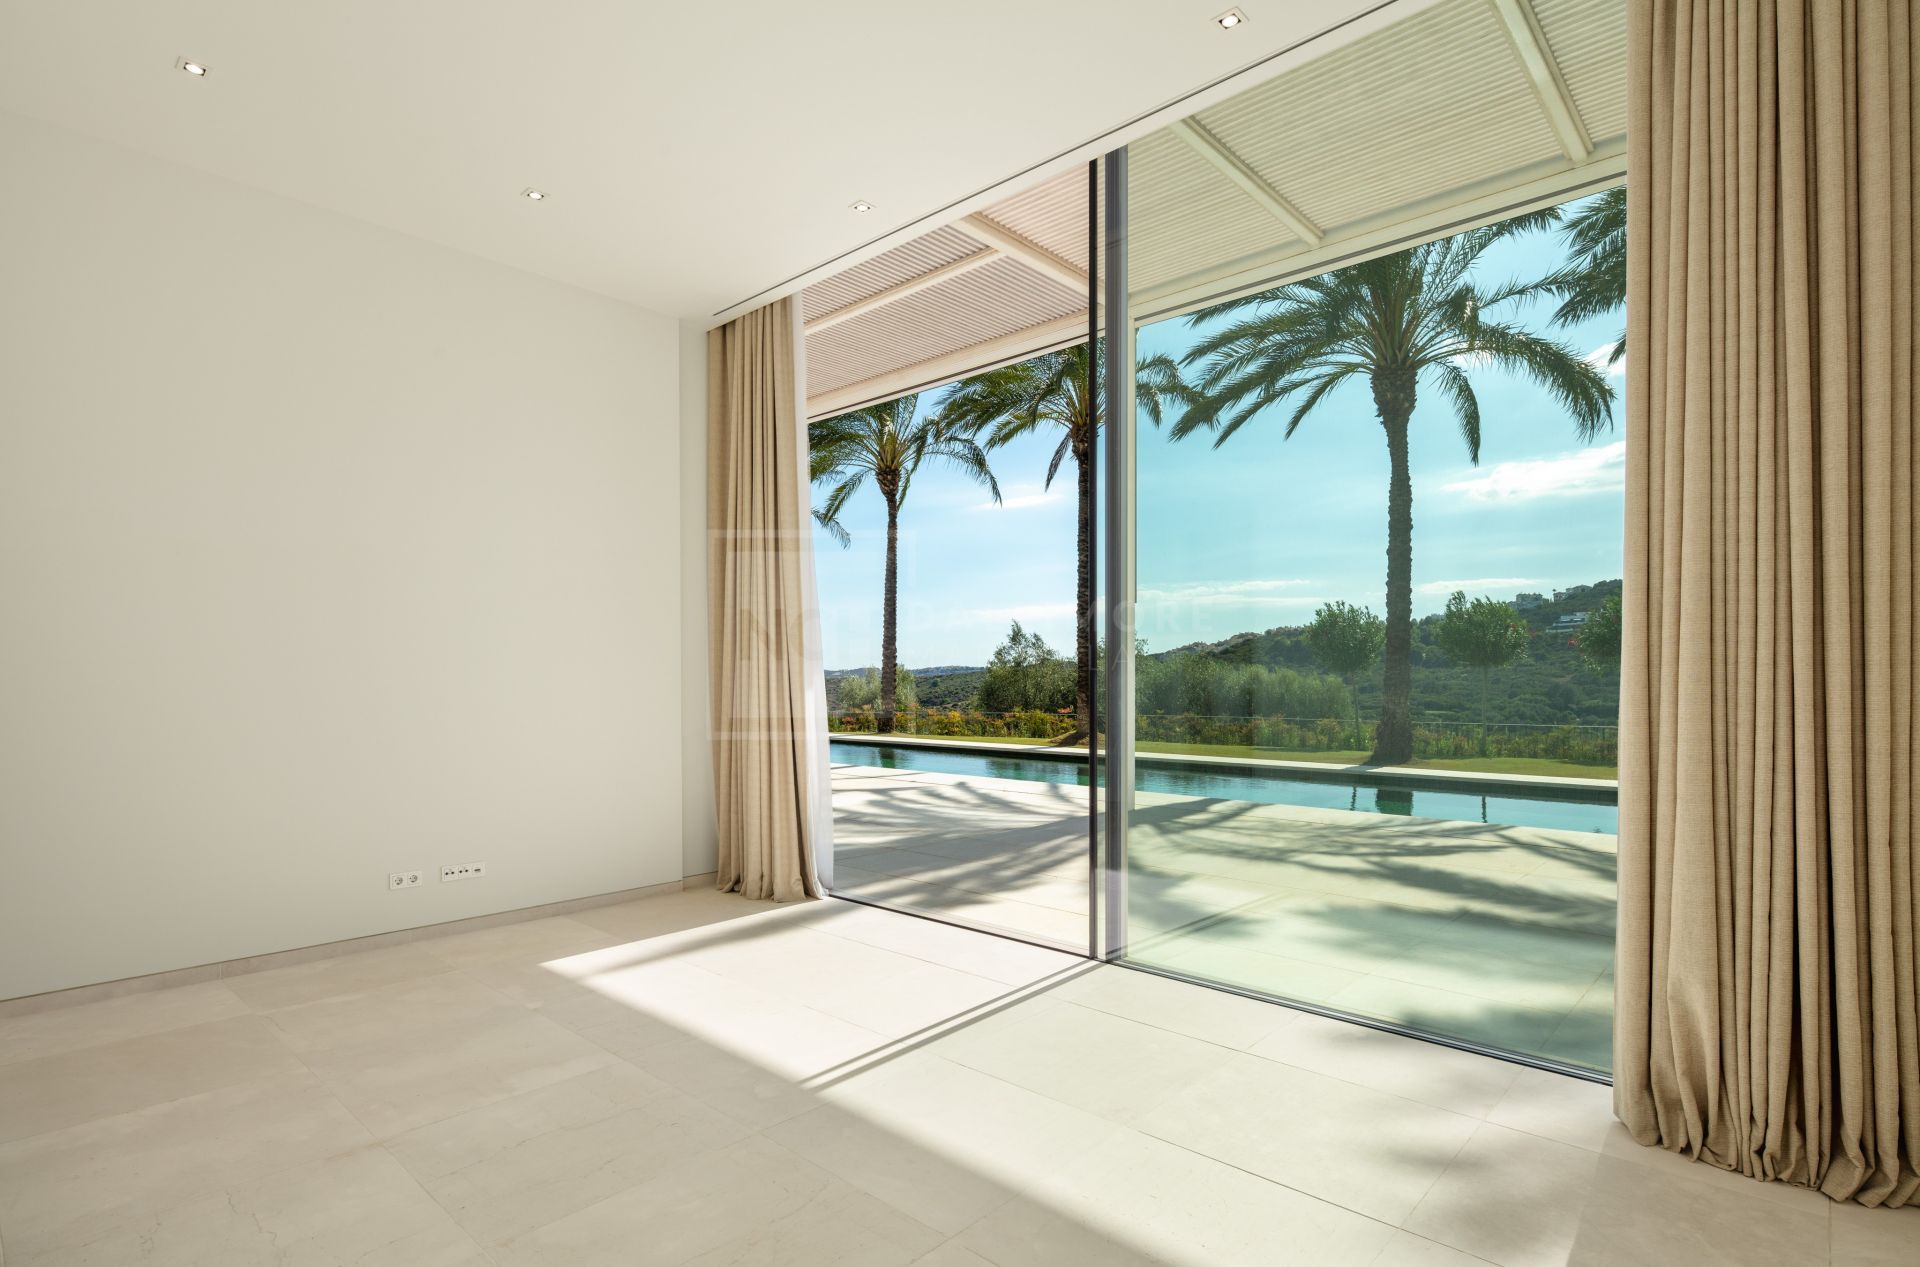 MODERN FRONT-LINE GOLF VILLA LOCATED WITHING THE FINCA CORTESIN RESORT